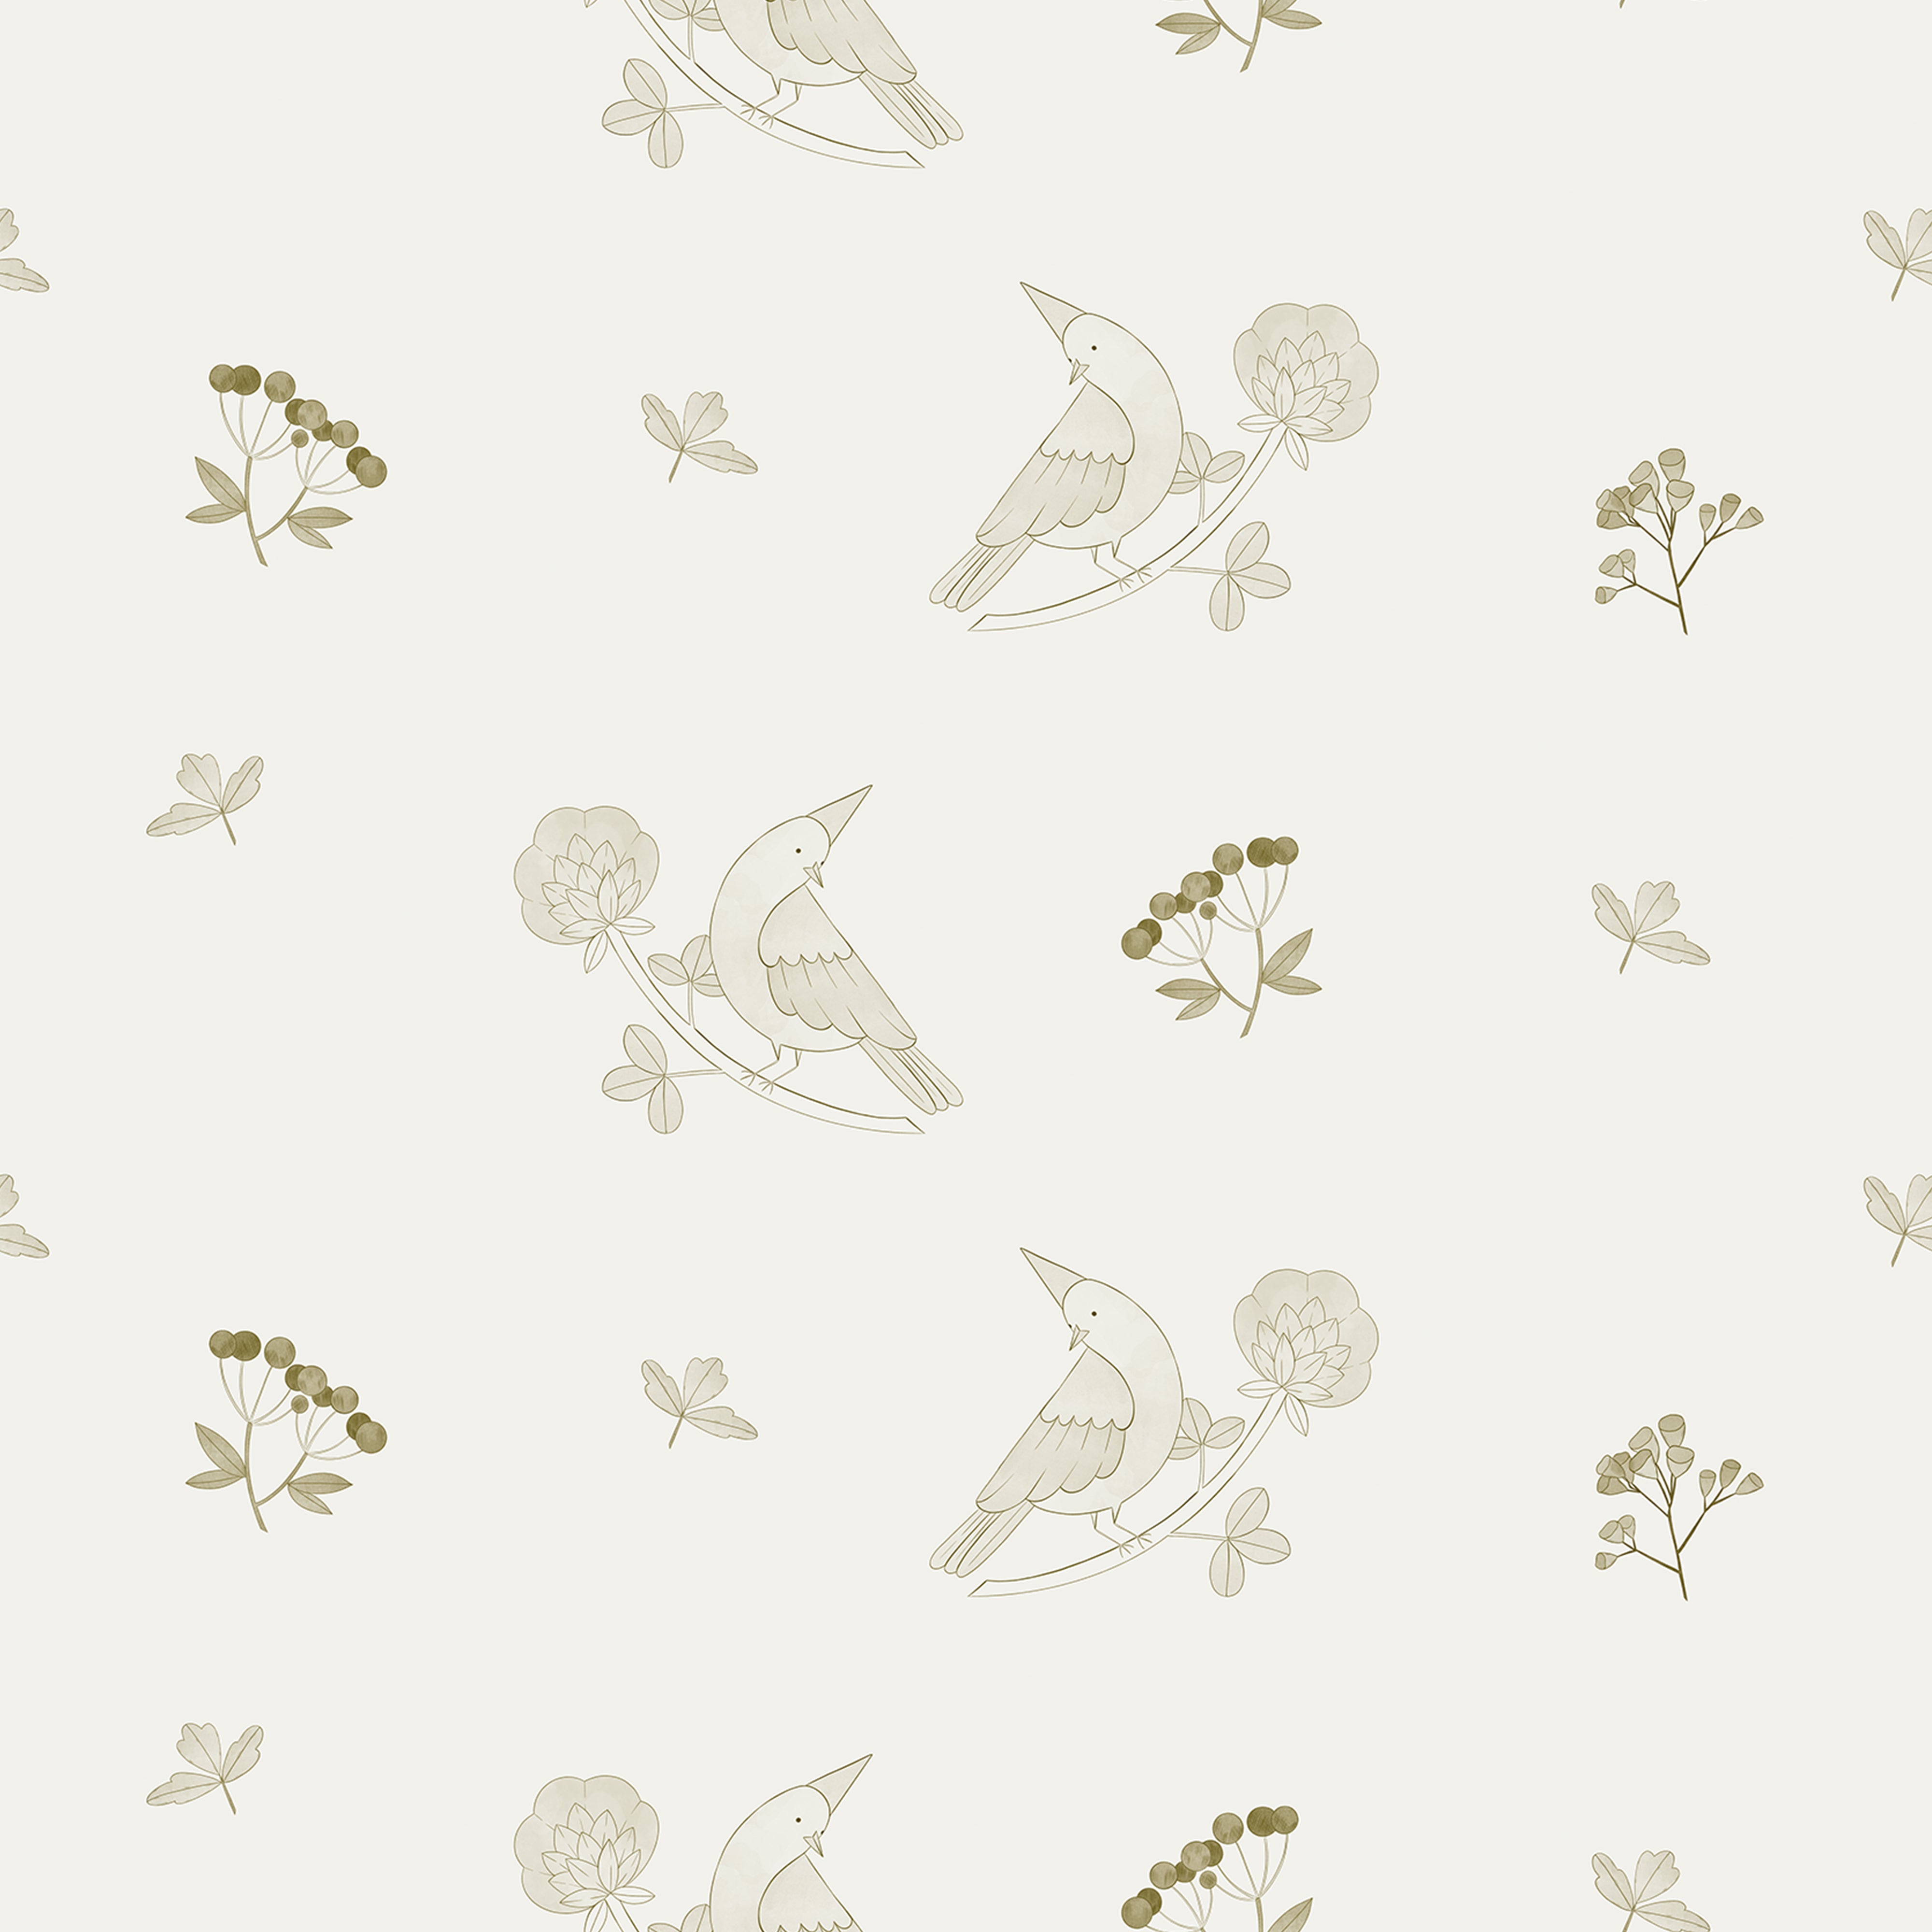 Dainty Little Birds with Cone Shaped Hats - Khaki